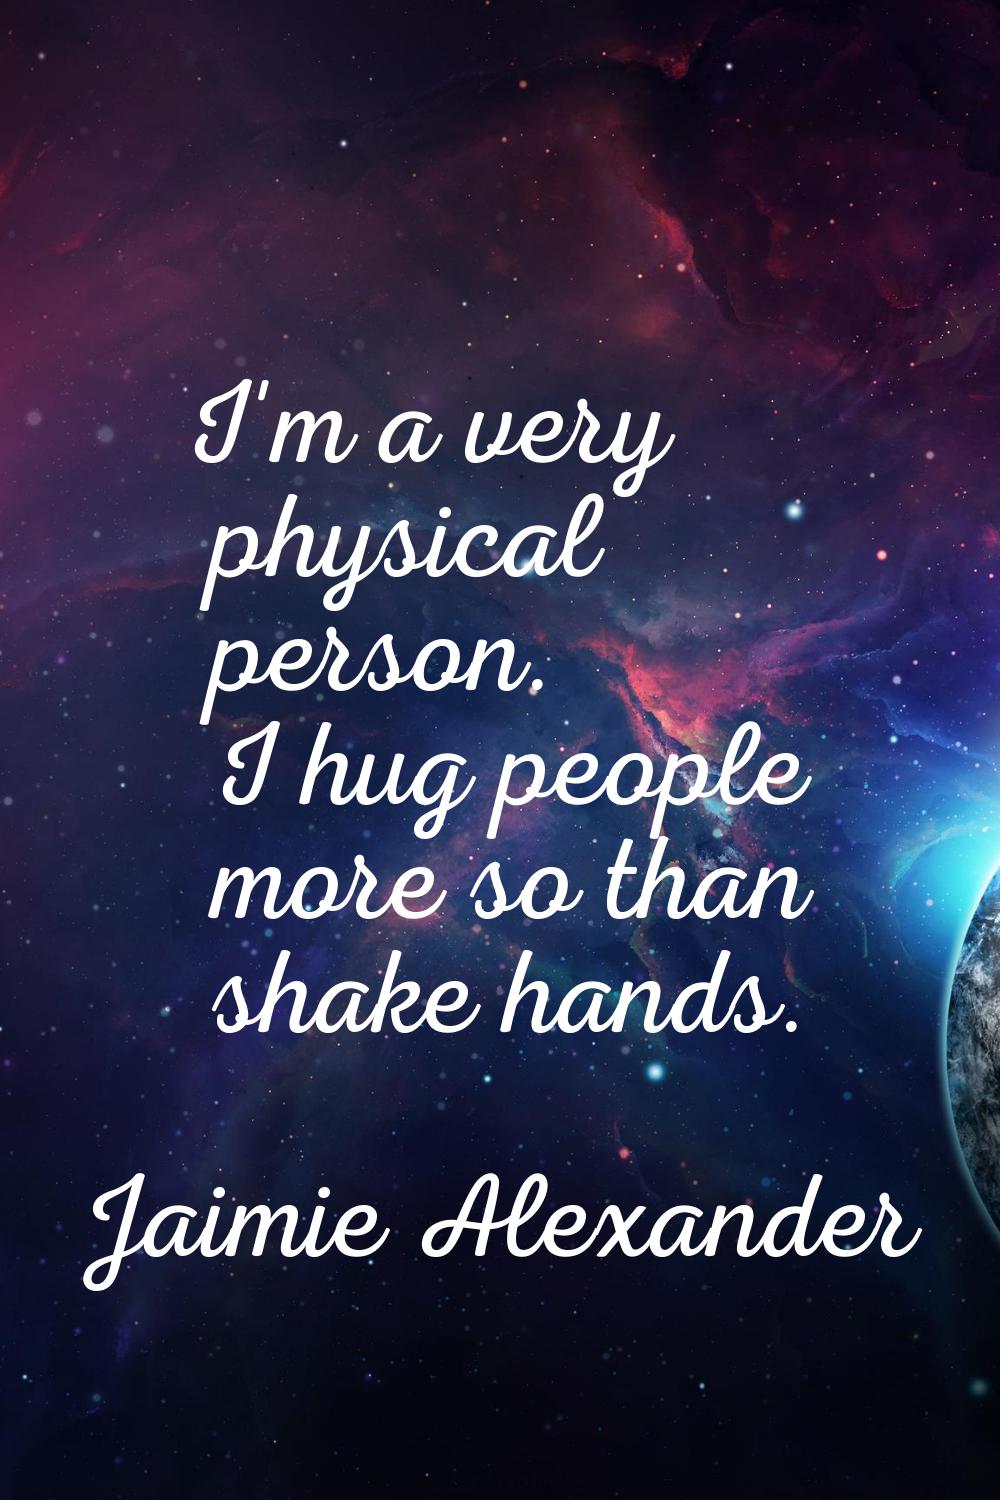 I'm a very physical person. I hug people more so than shake hands.